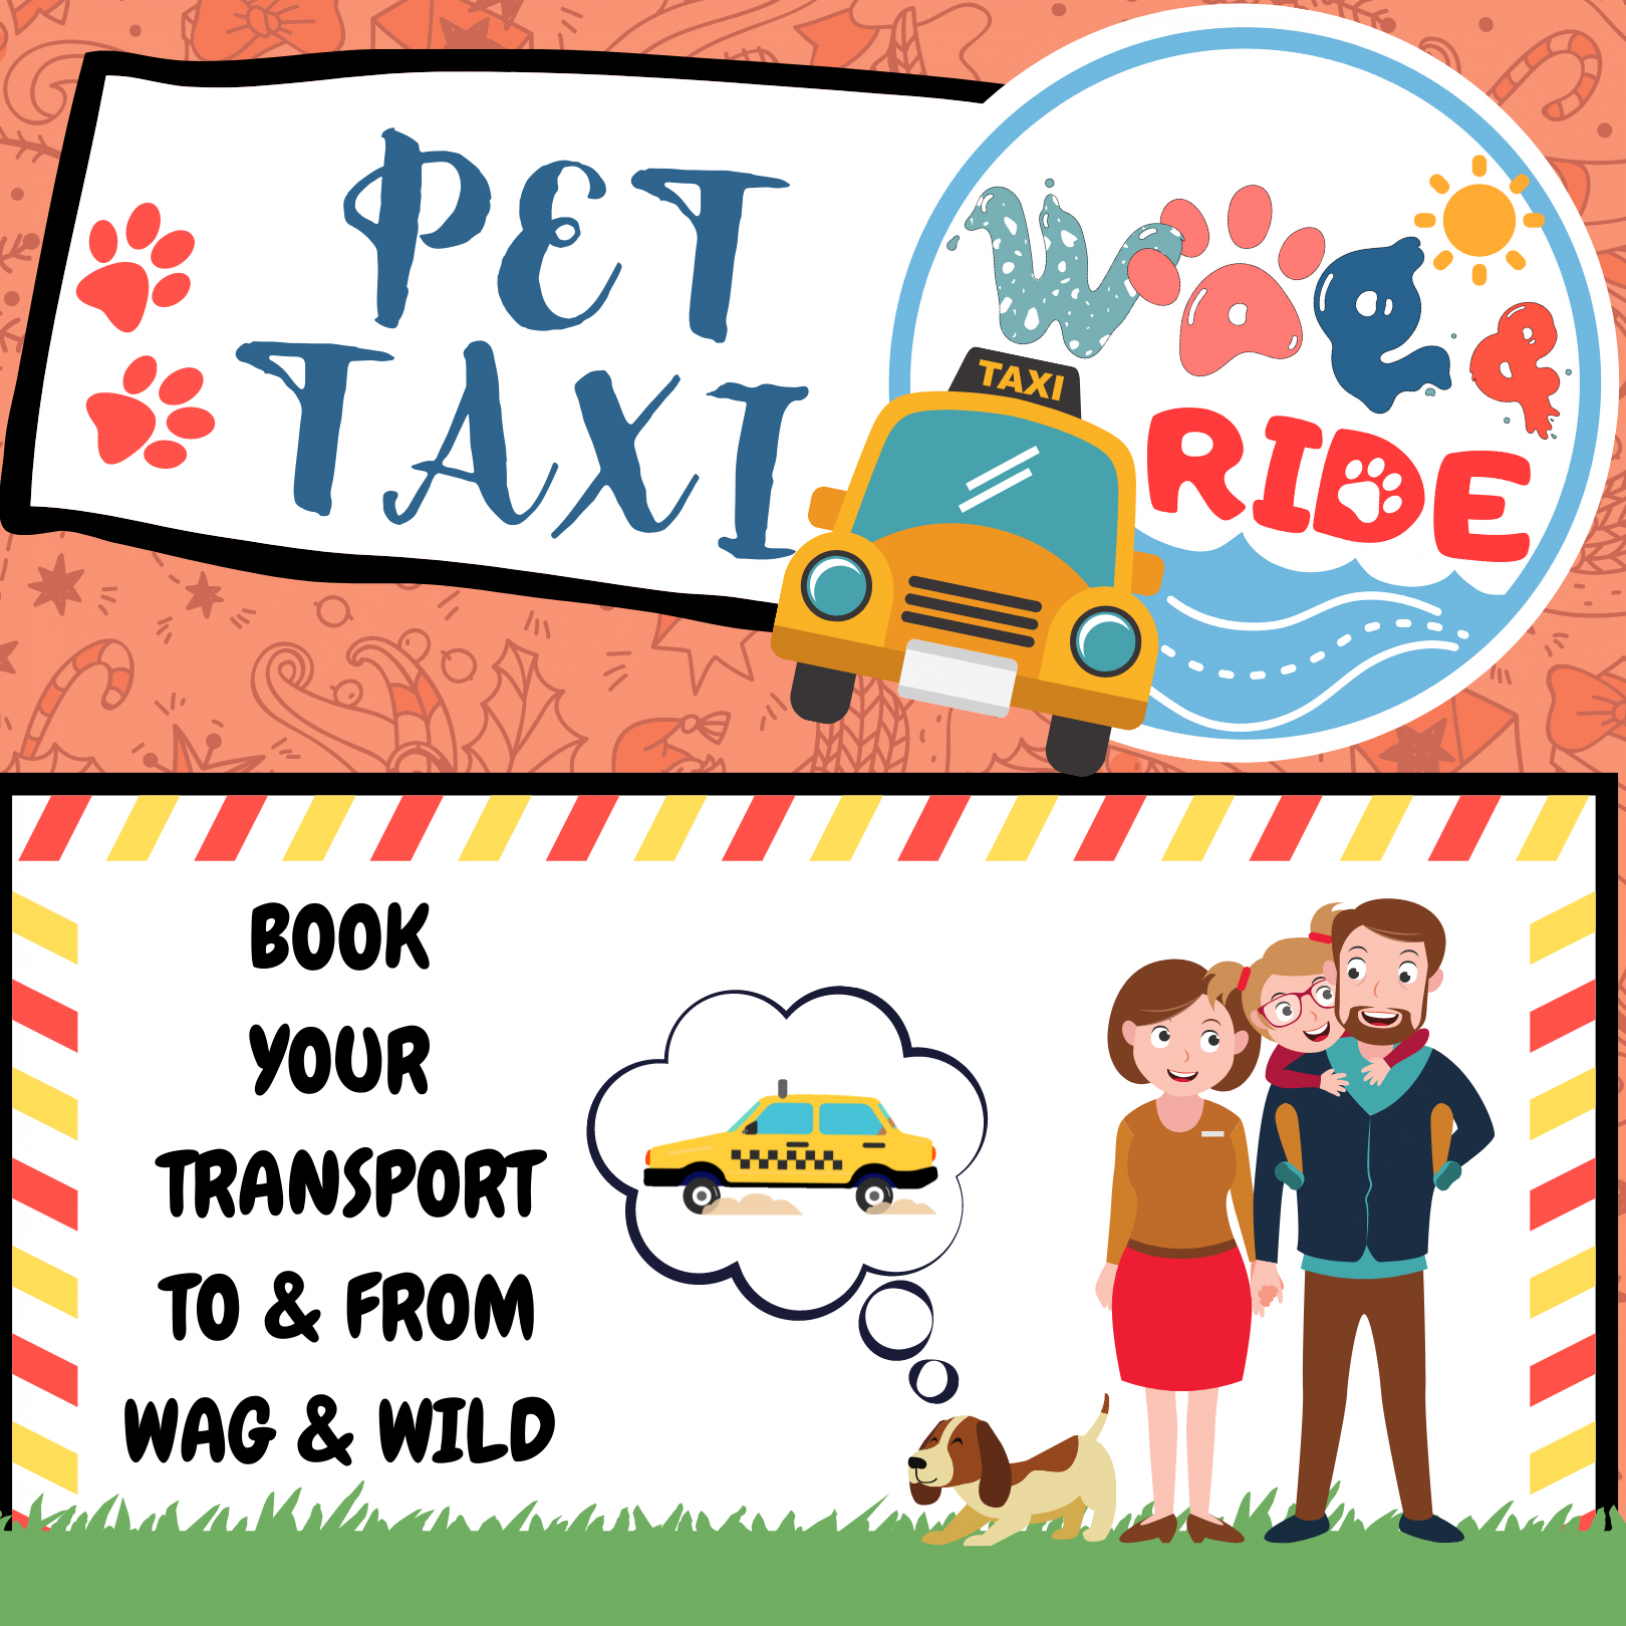 WAG & RIDE (PET TAXI SERVICE)